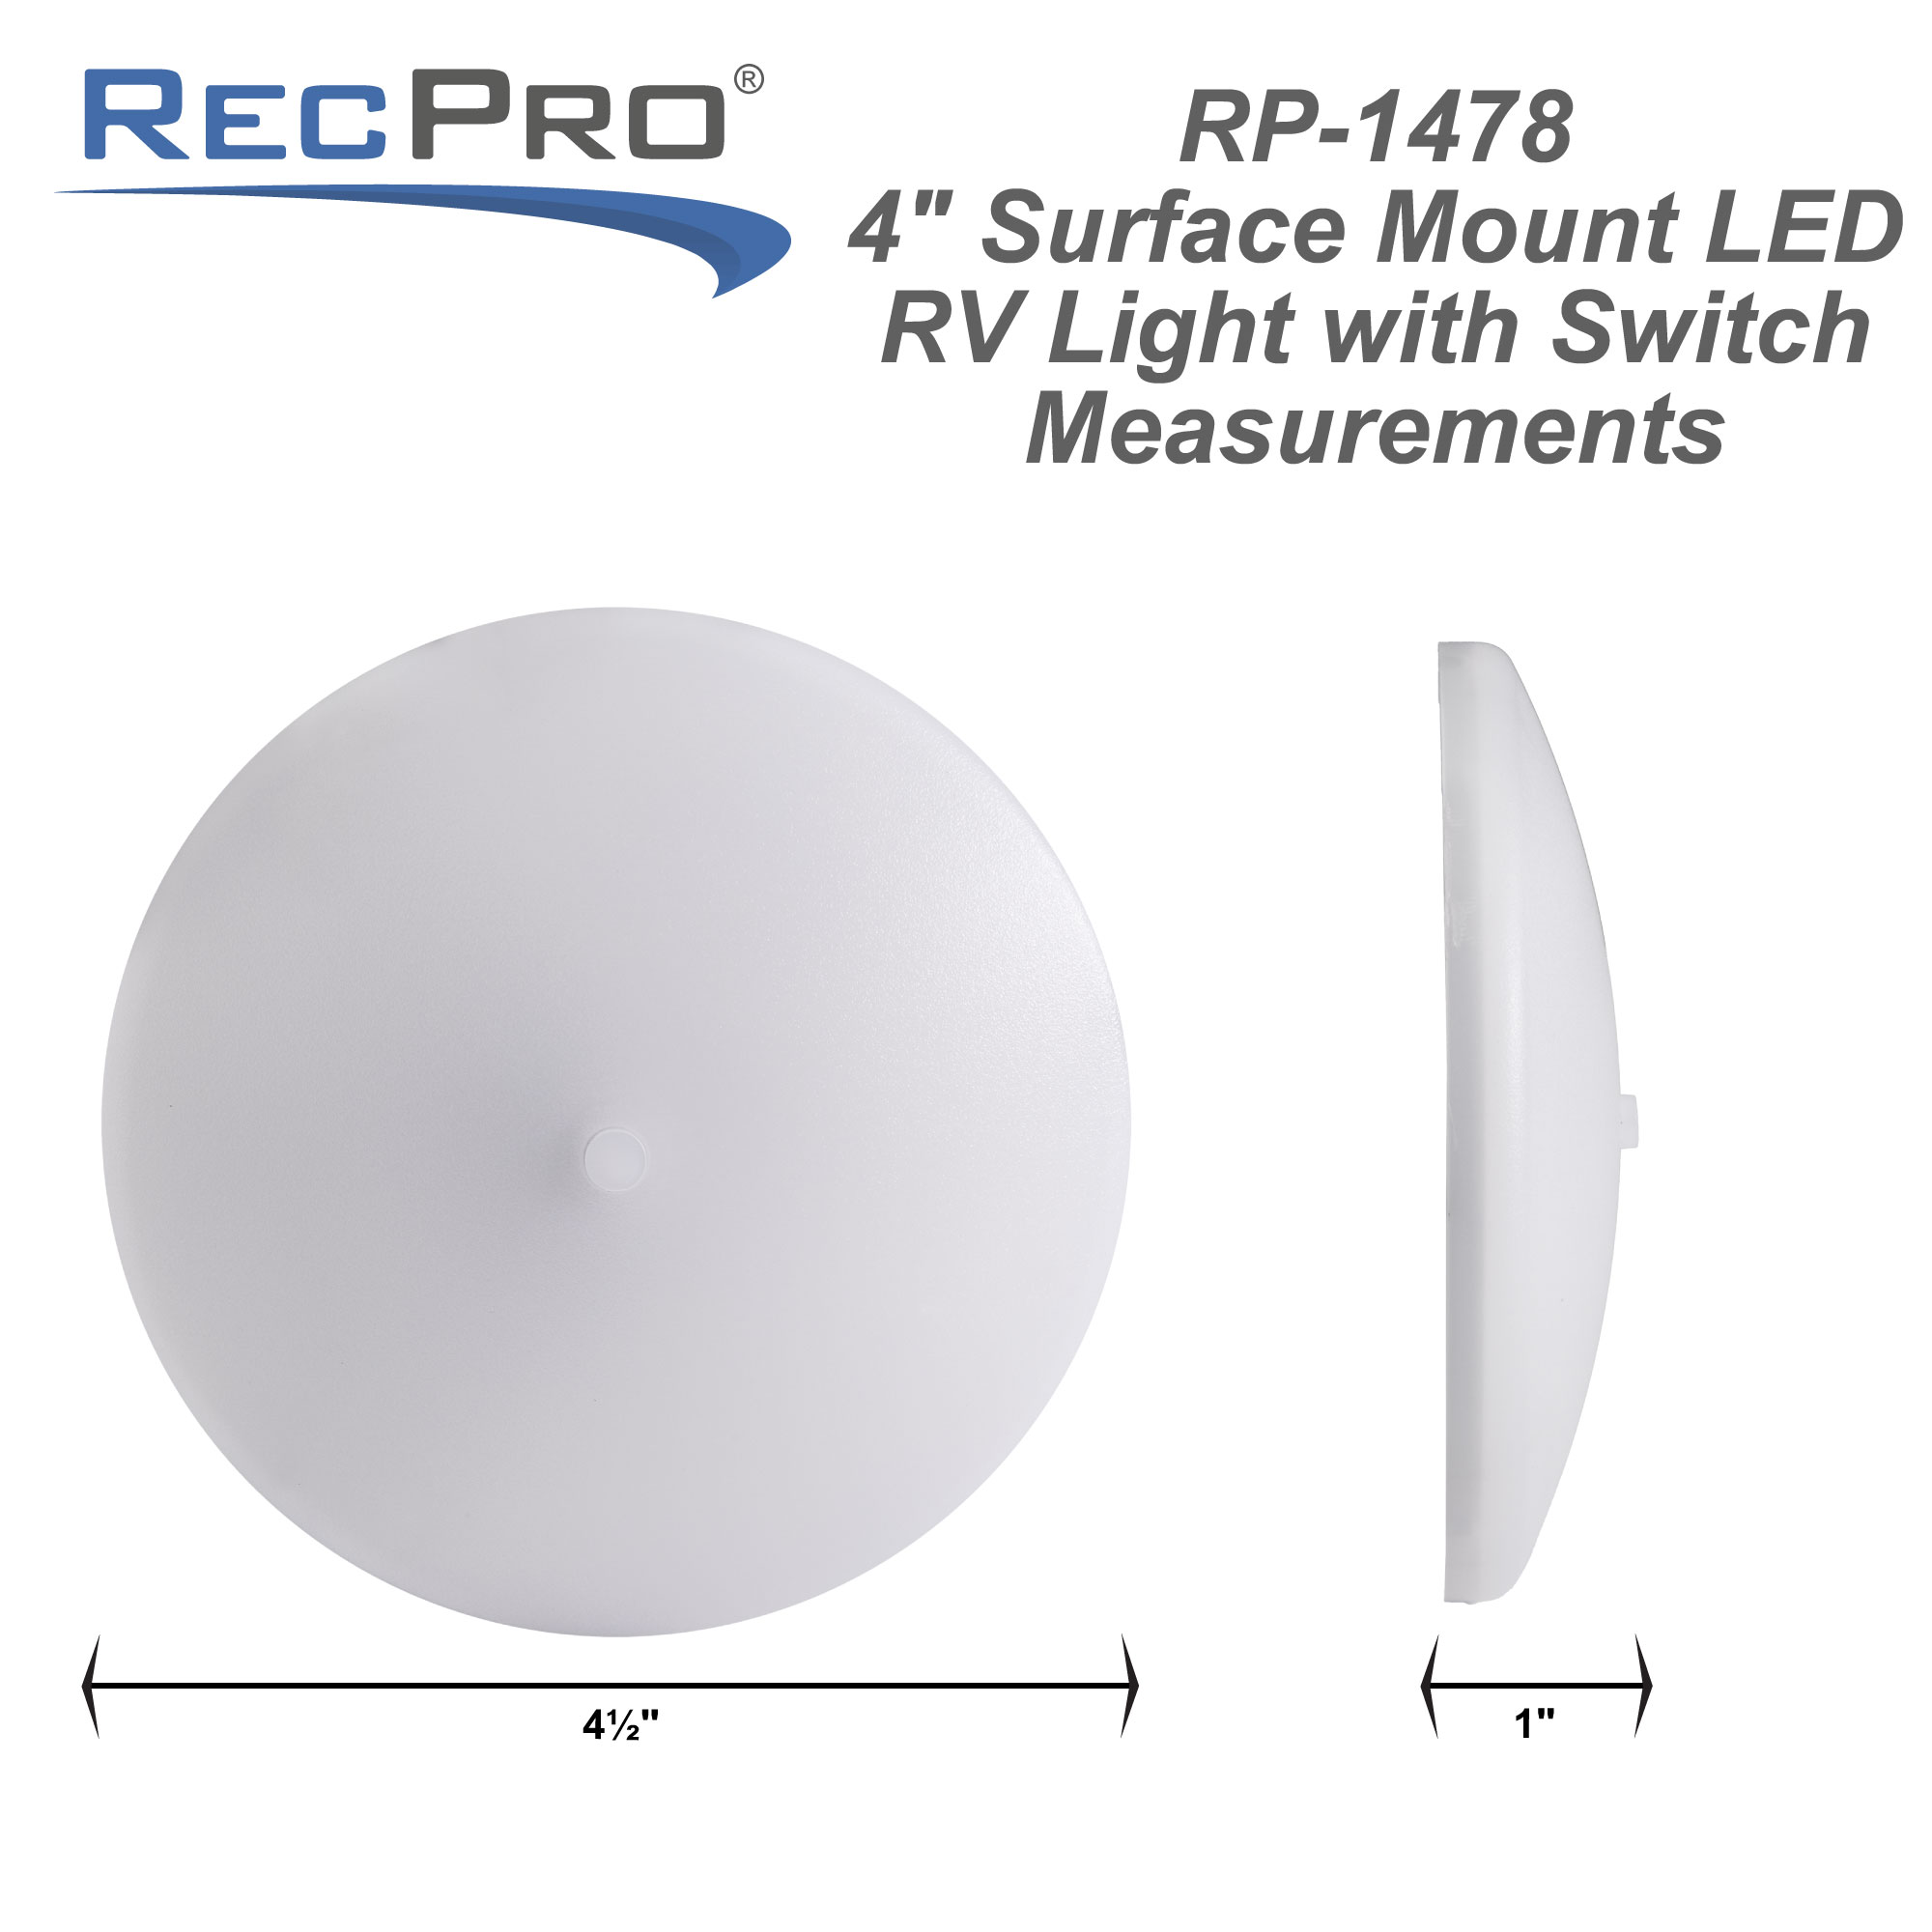 https://cdn11.bigcommerce.com/s-kwuh809851/product_images/uploaded_images/rp-1478-4-inch-surface-mount-led-rv-light-with-switch-measurements.jpg